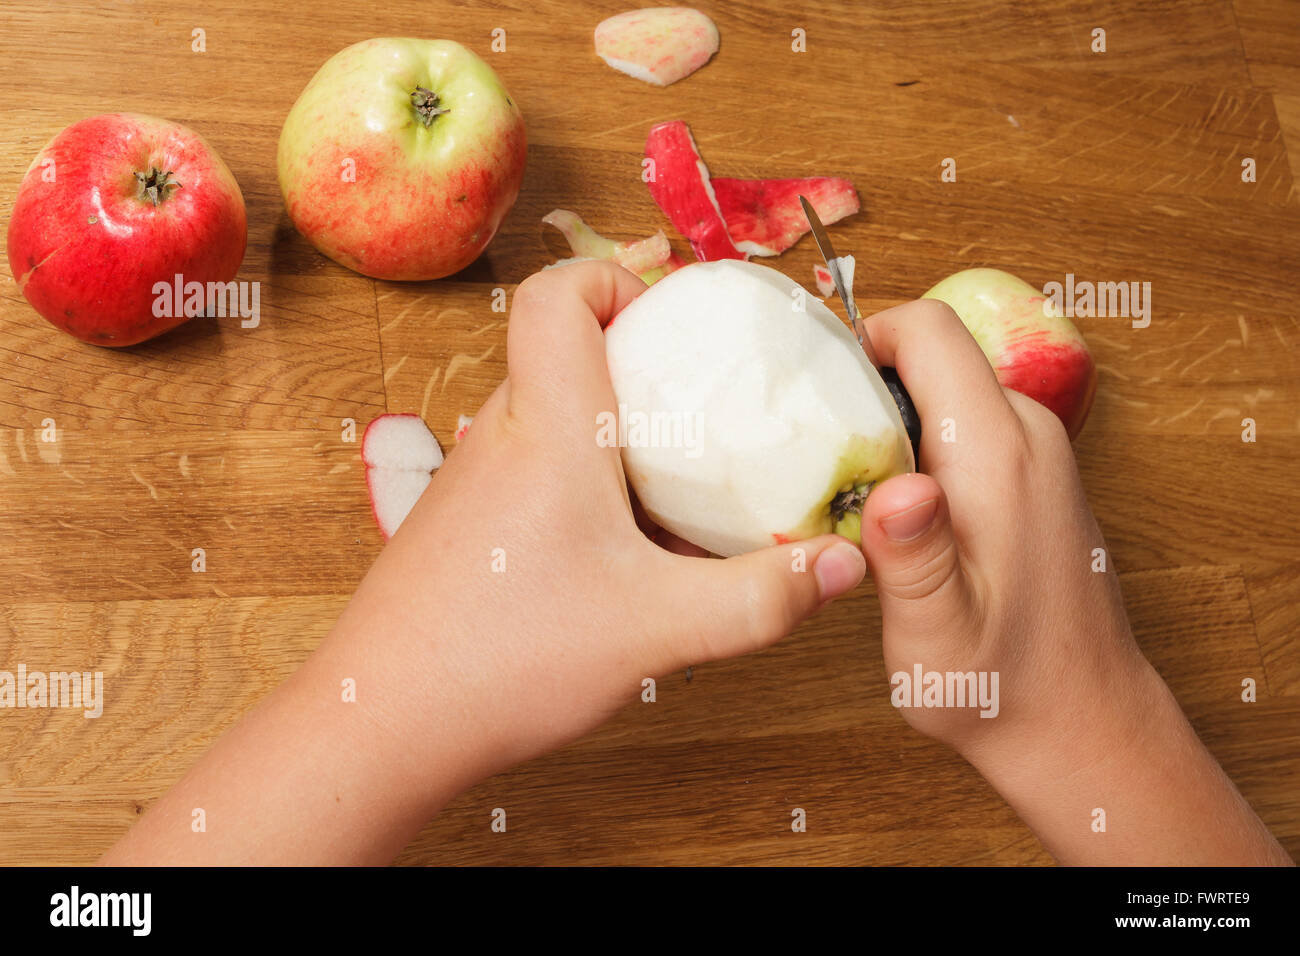 Hands of a child peel an apple Stock Photo